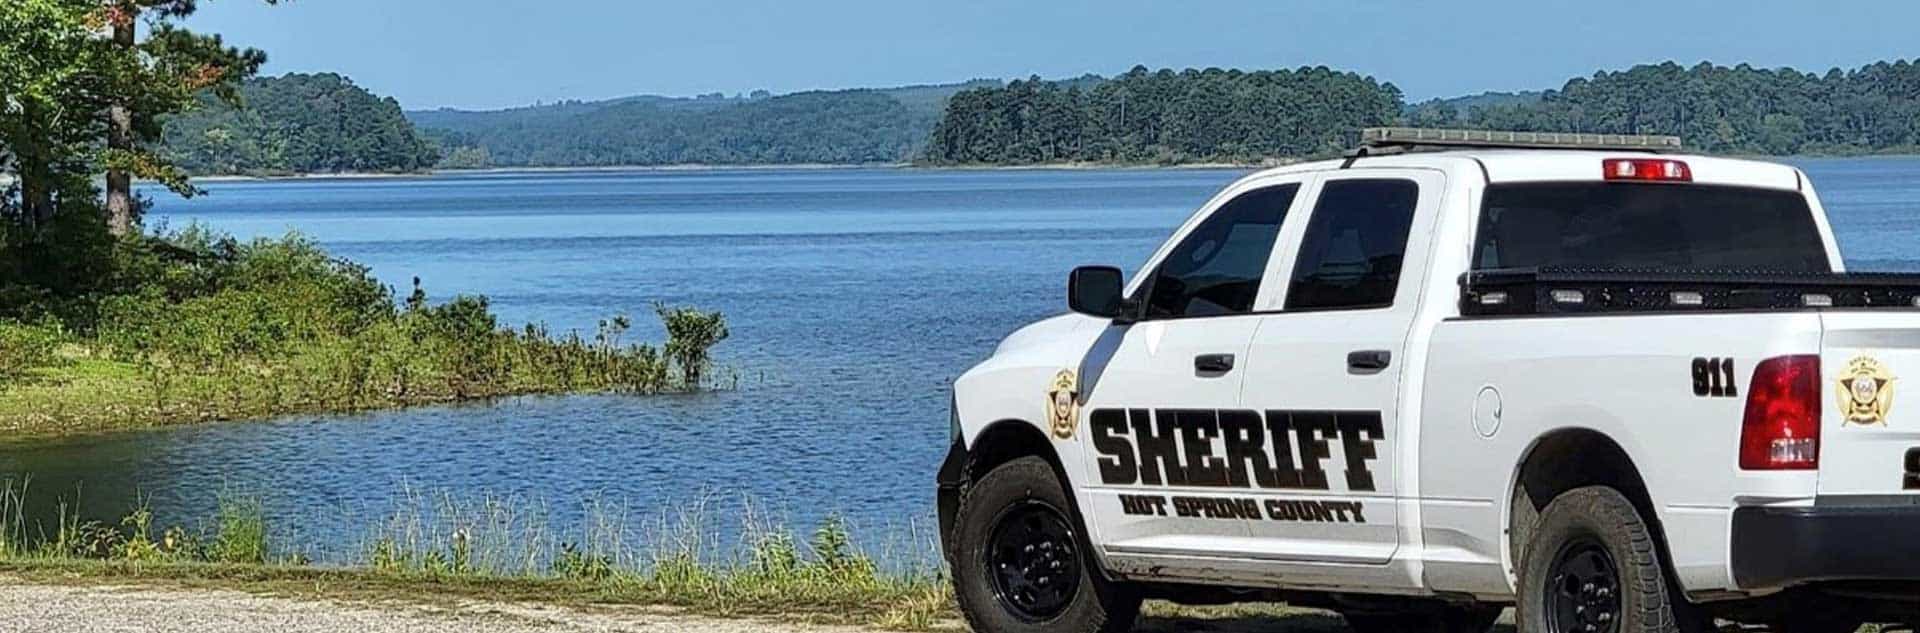 A Hot Spring County Sheriff patrol truck in front of a lake.